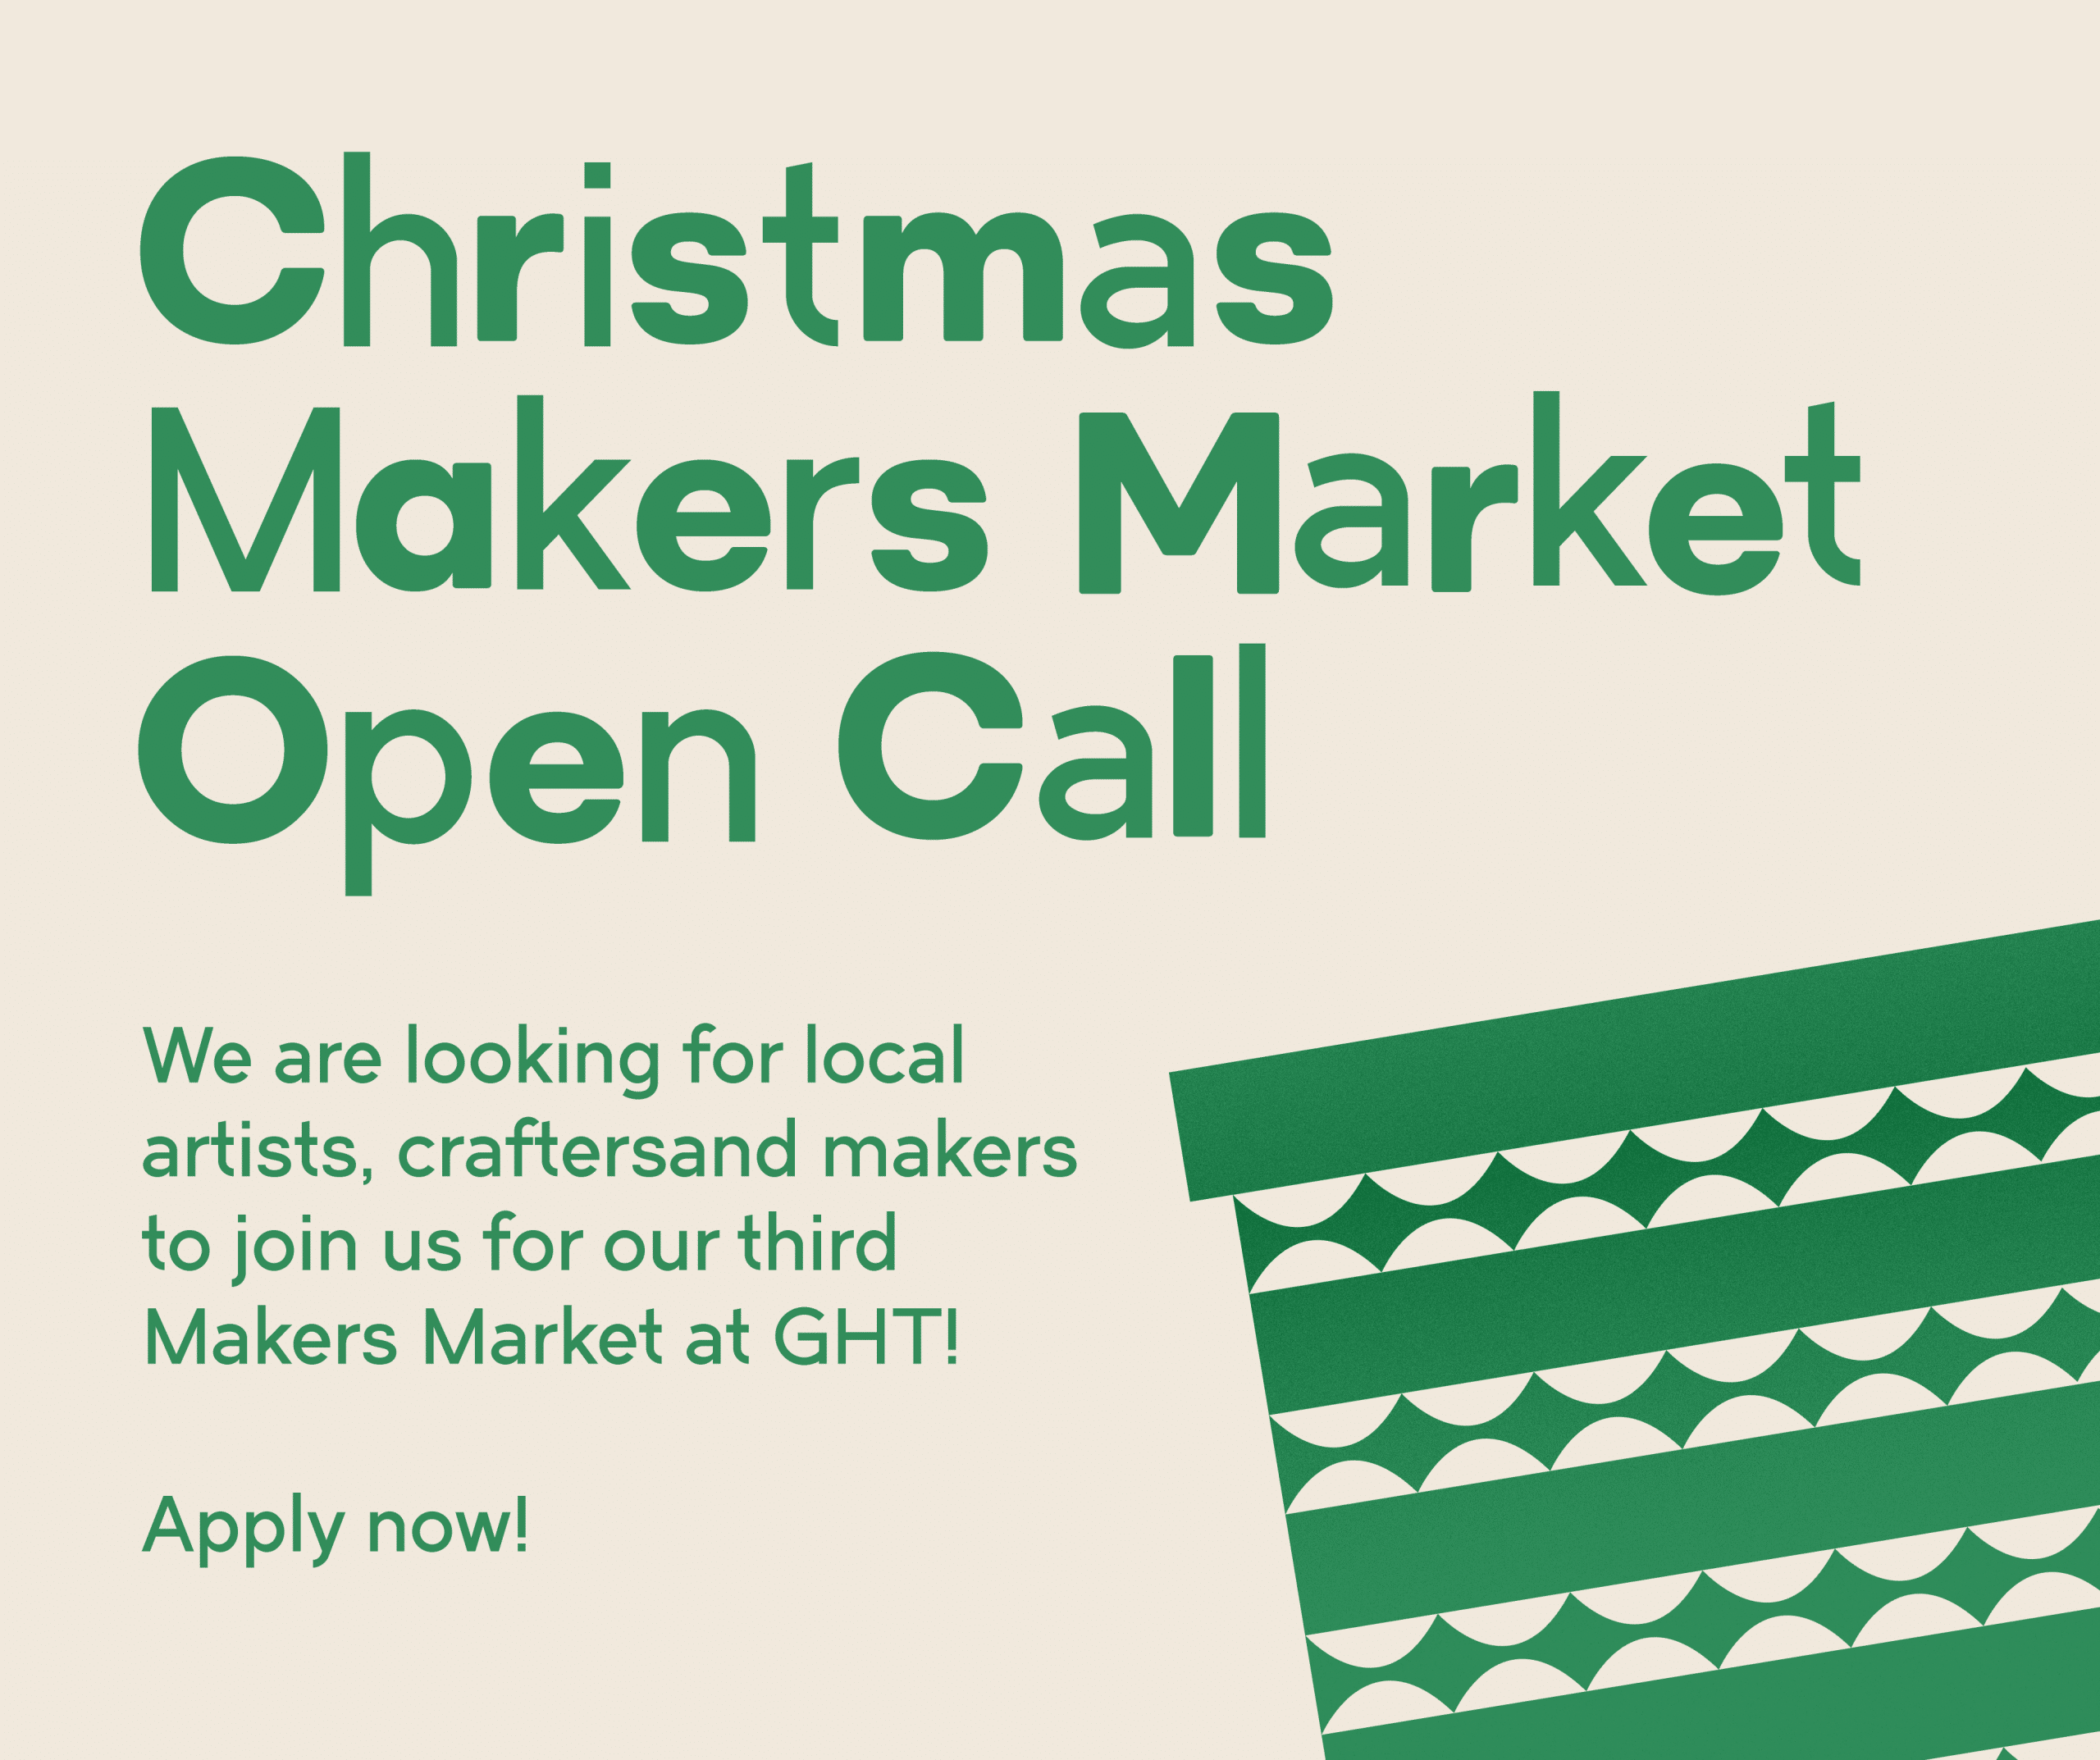 Illustrated Present with the title Christmas Makers Market Open Call